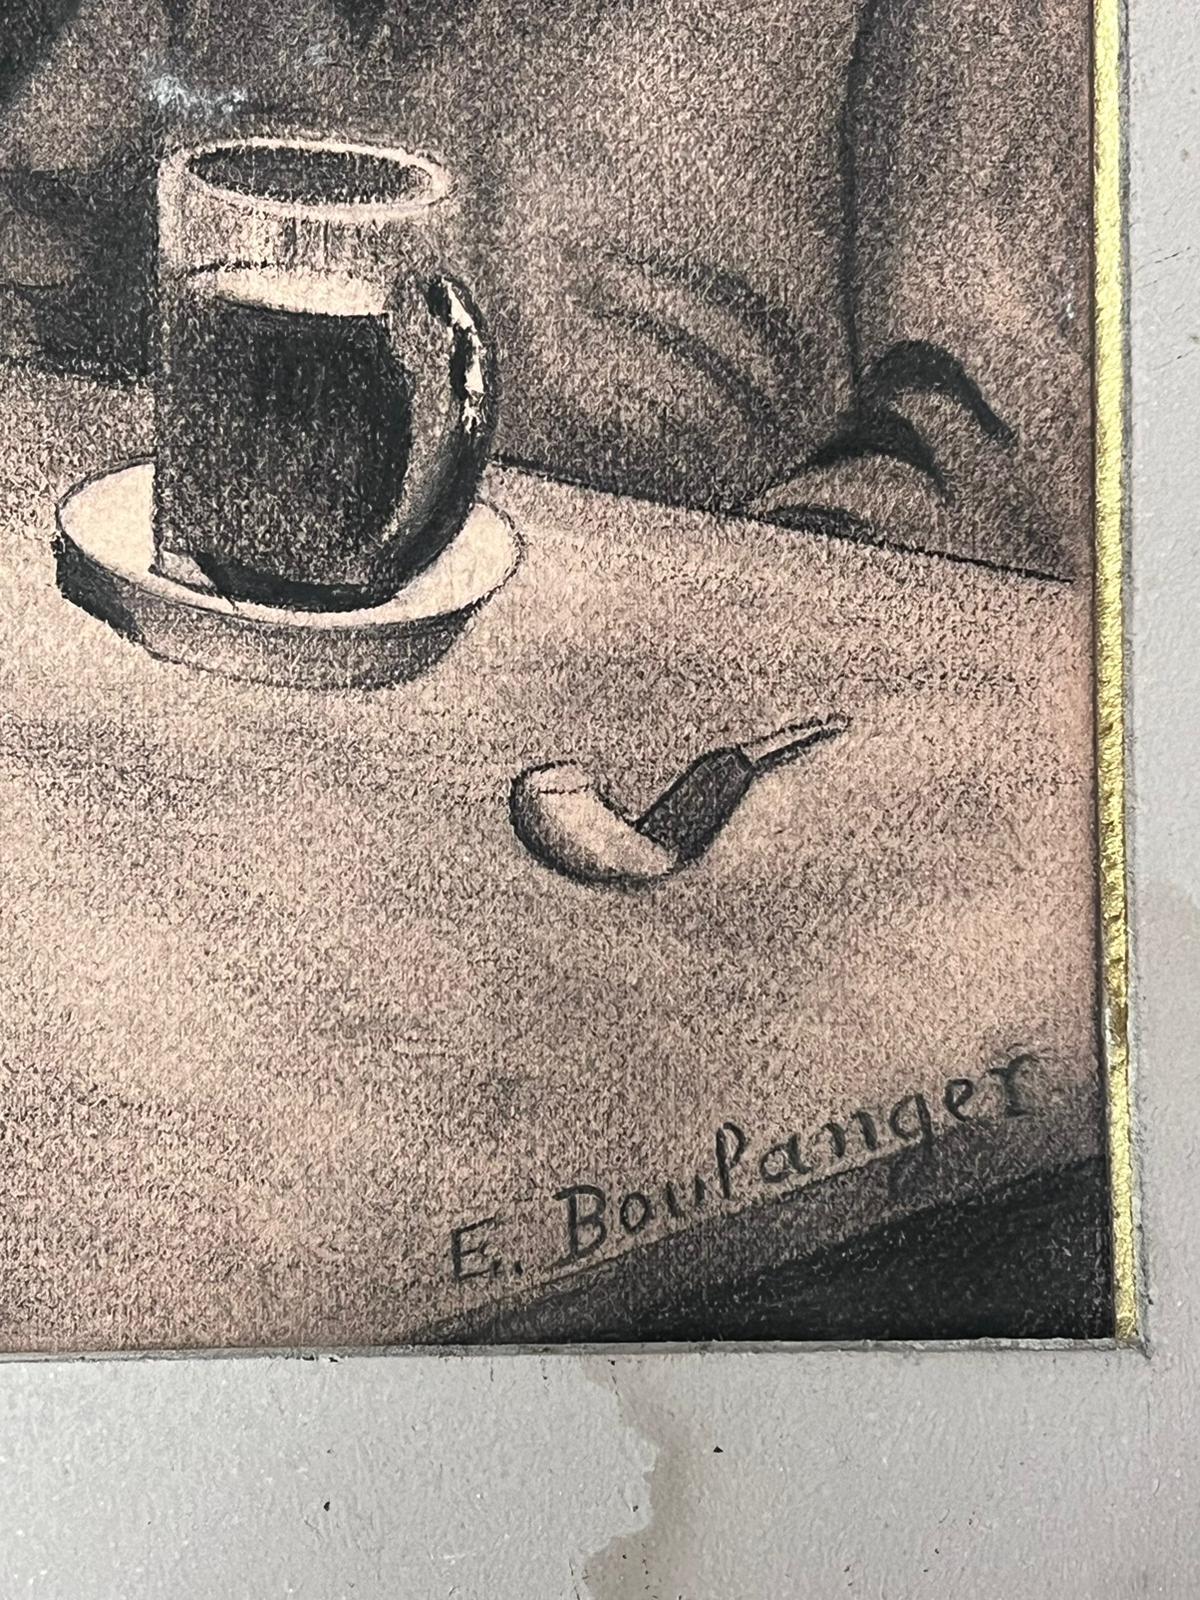 The Bar
French artist, signed, 
circa 1890's period
signed charcoal drawing on paper, mounted in card frame
mount: 16 x 19 inches
paper: 13 x 16 inches
provenance: private collection, France
condition: a few minor scuffs but overall good and sound